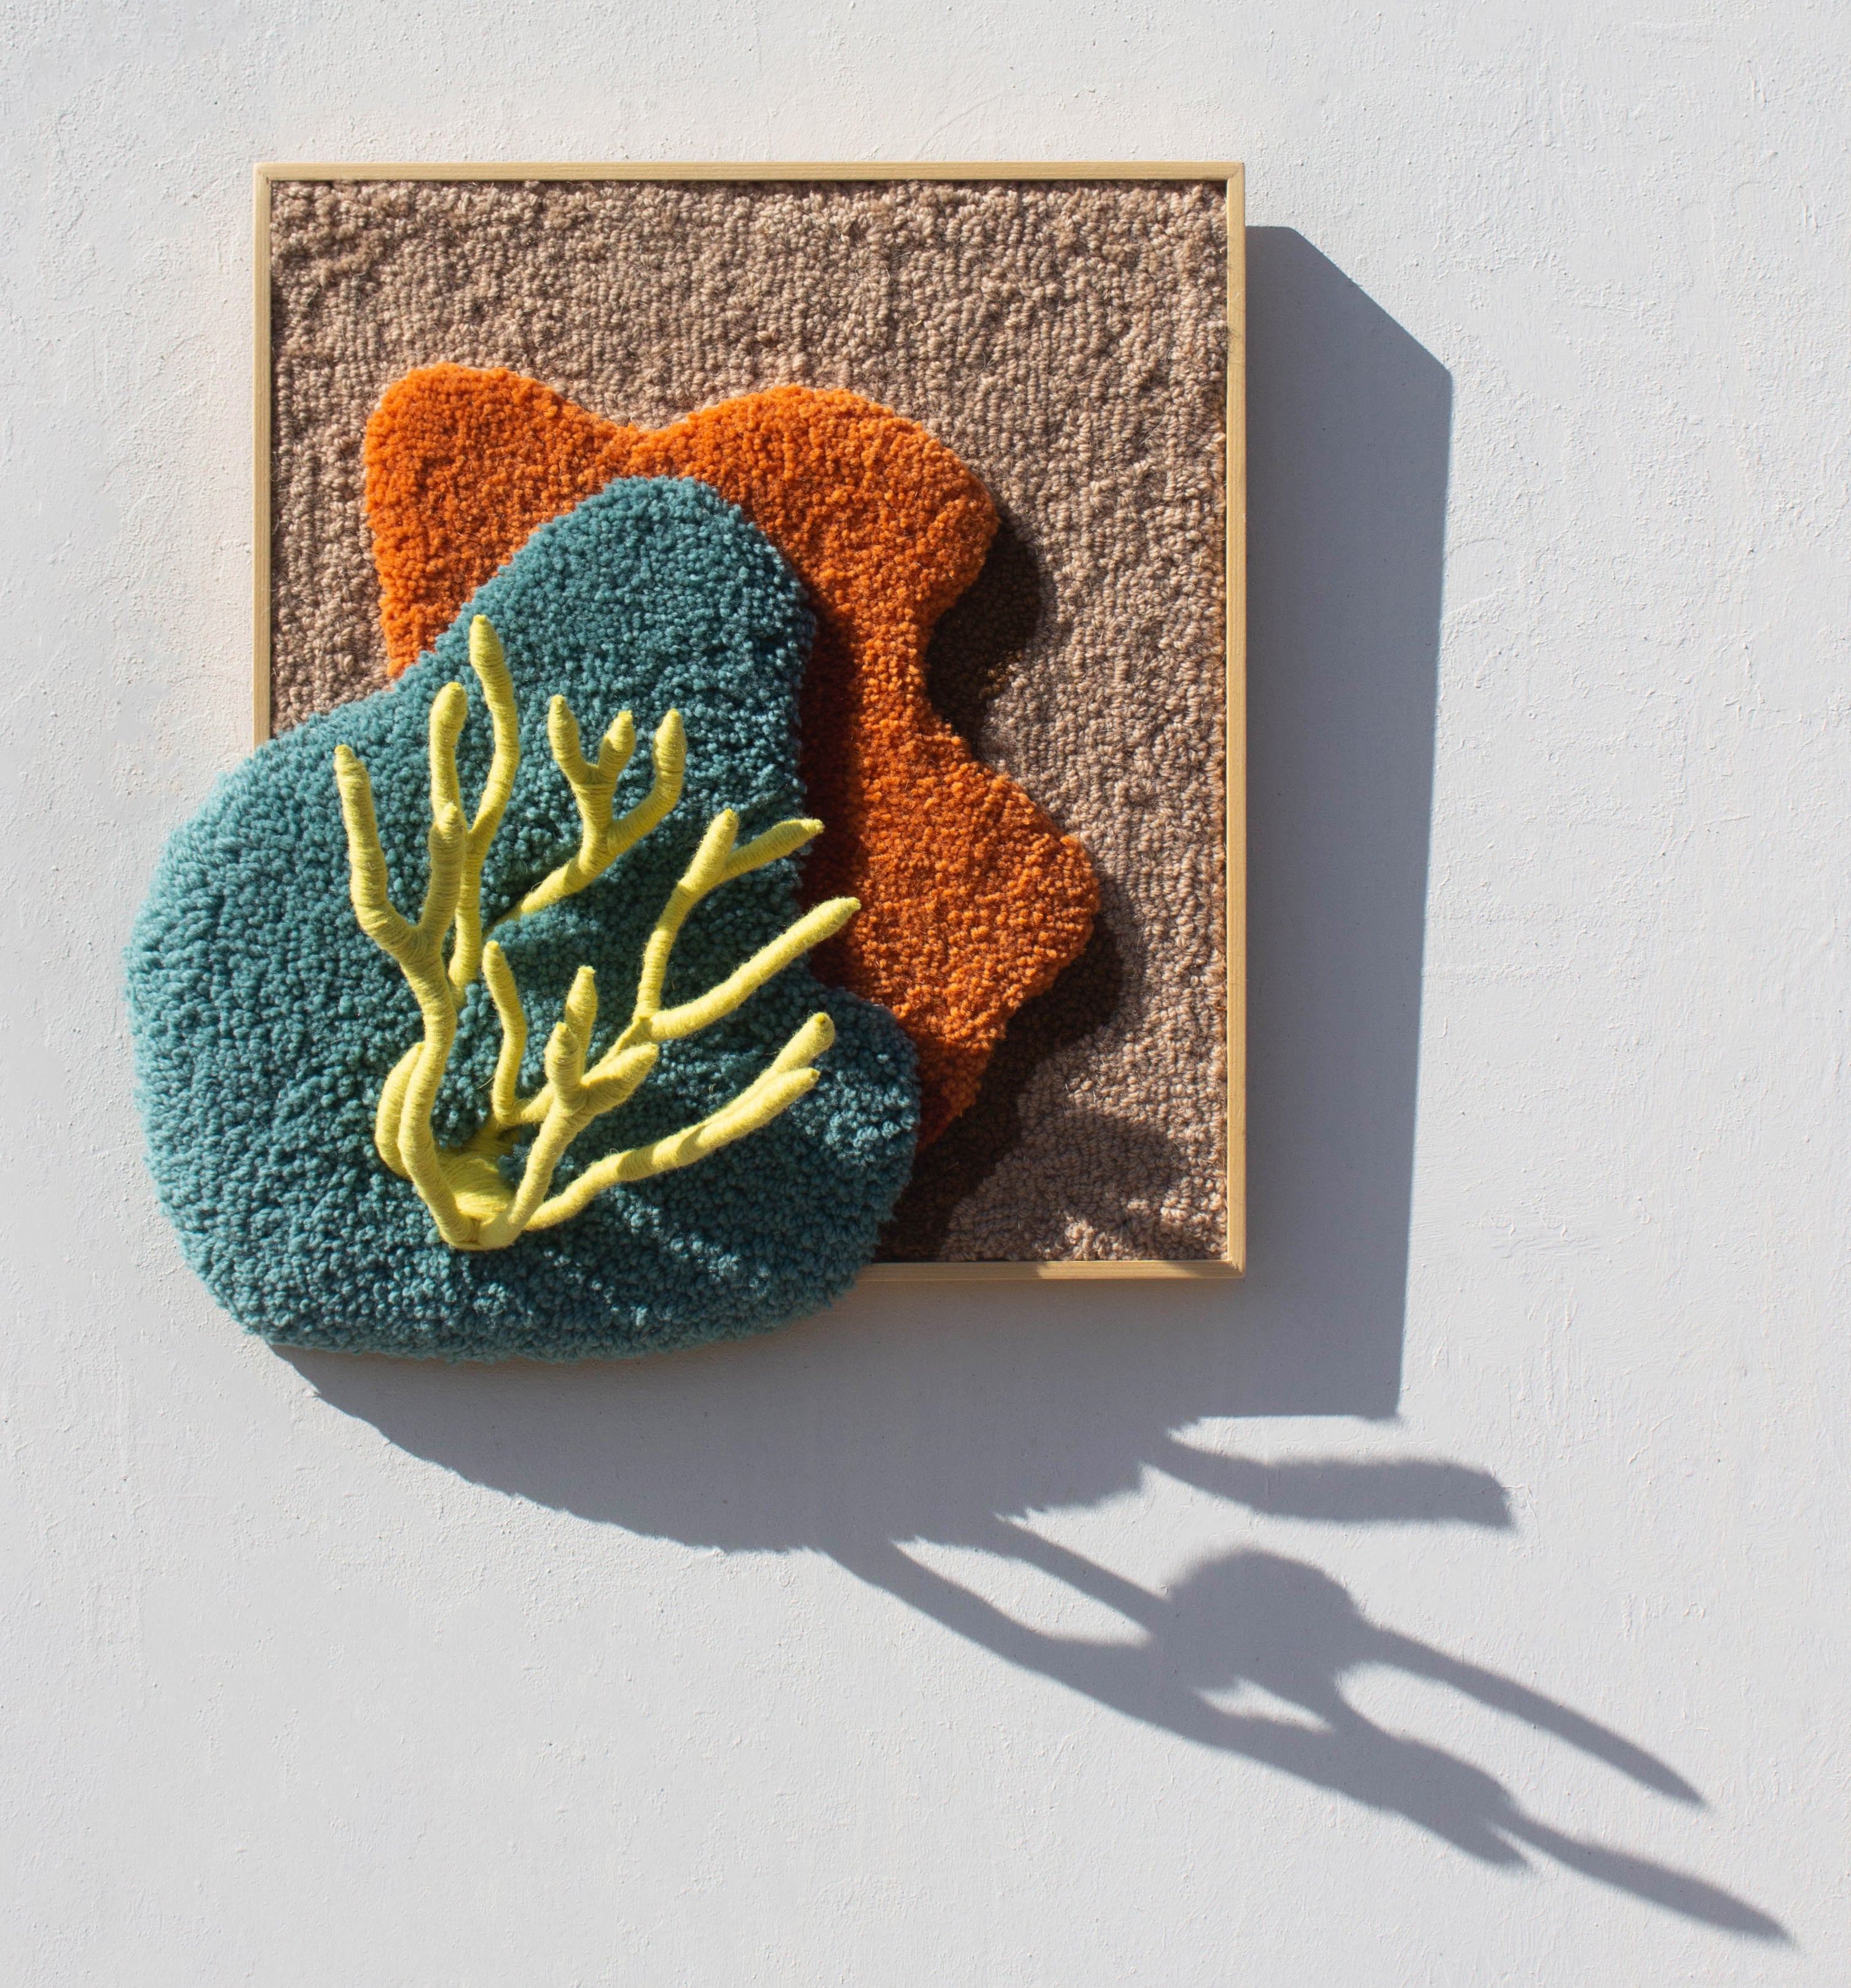 Handmade Contemporary Wall Tapestry with Textile Sculpture, Fiber Art by OHXOJA